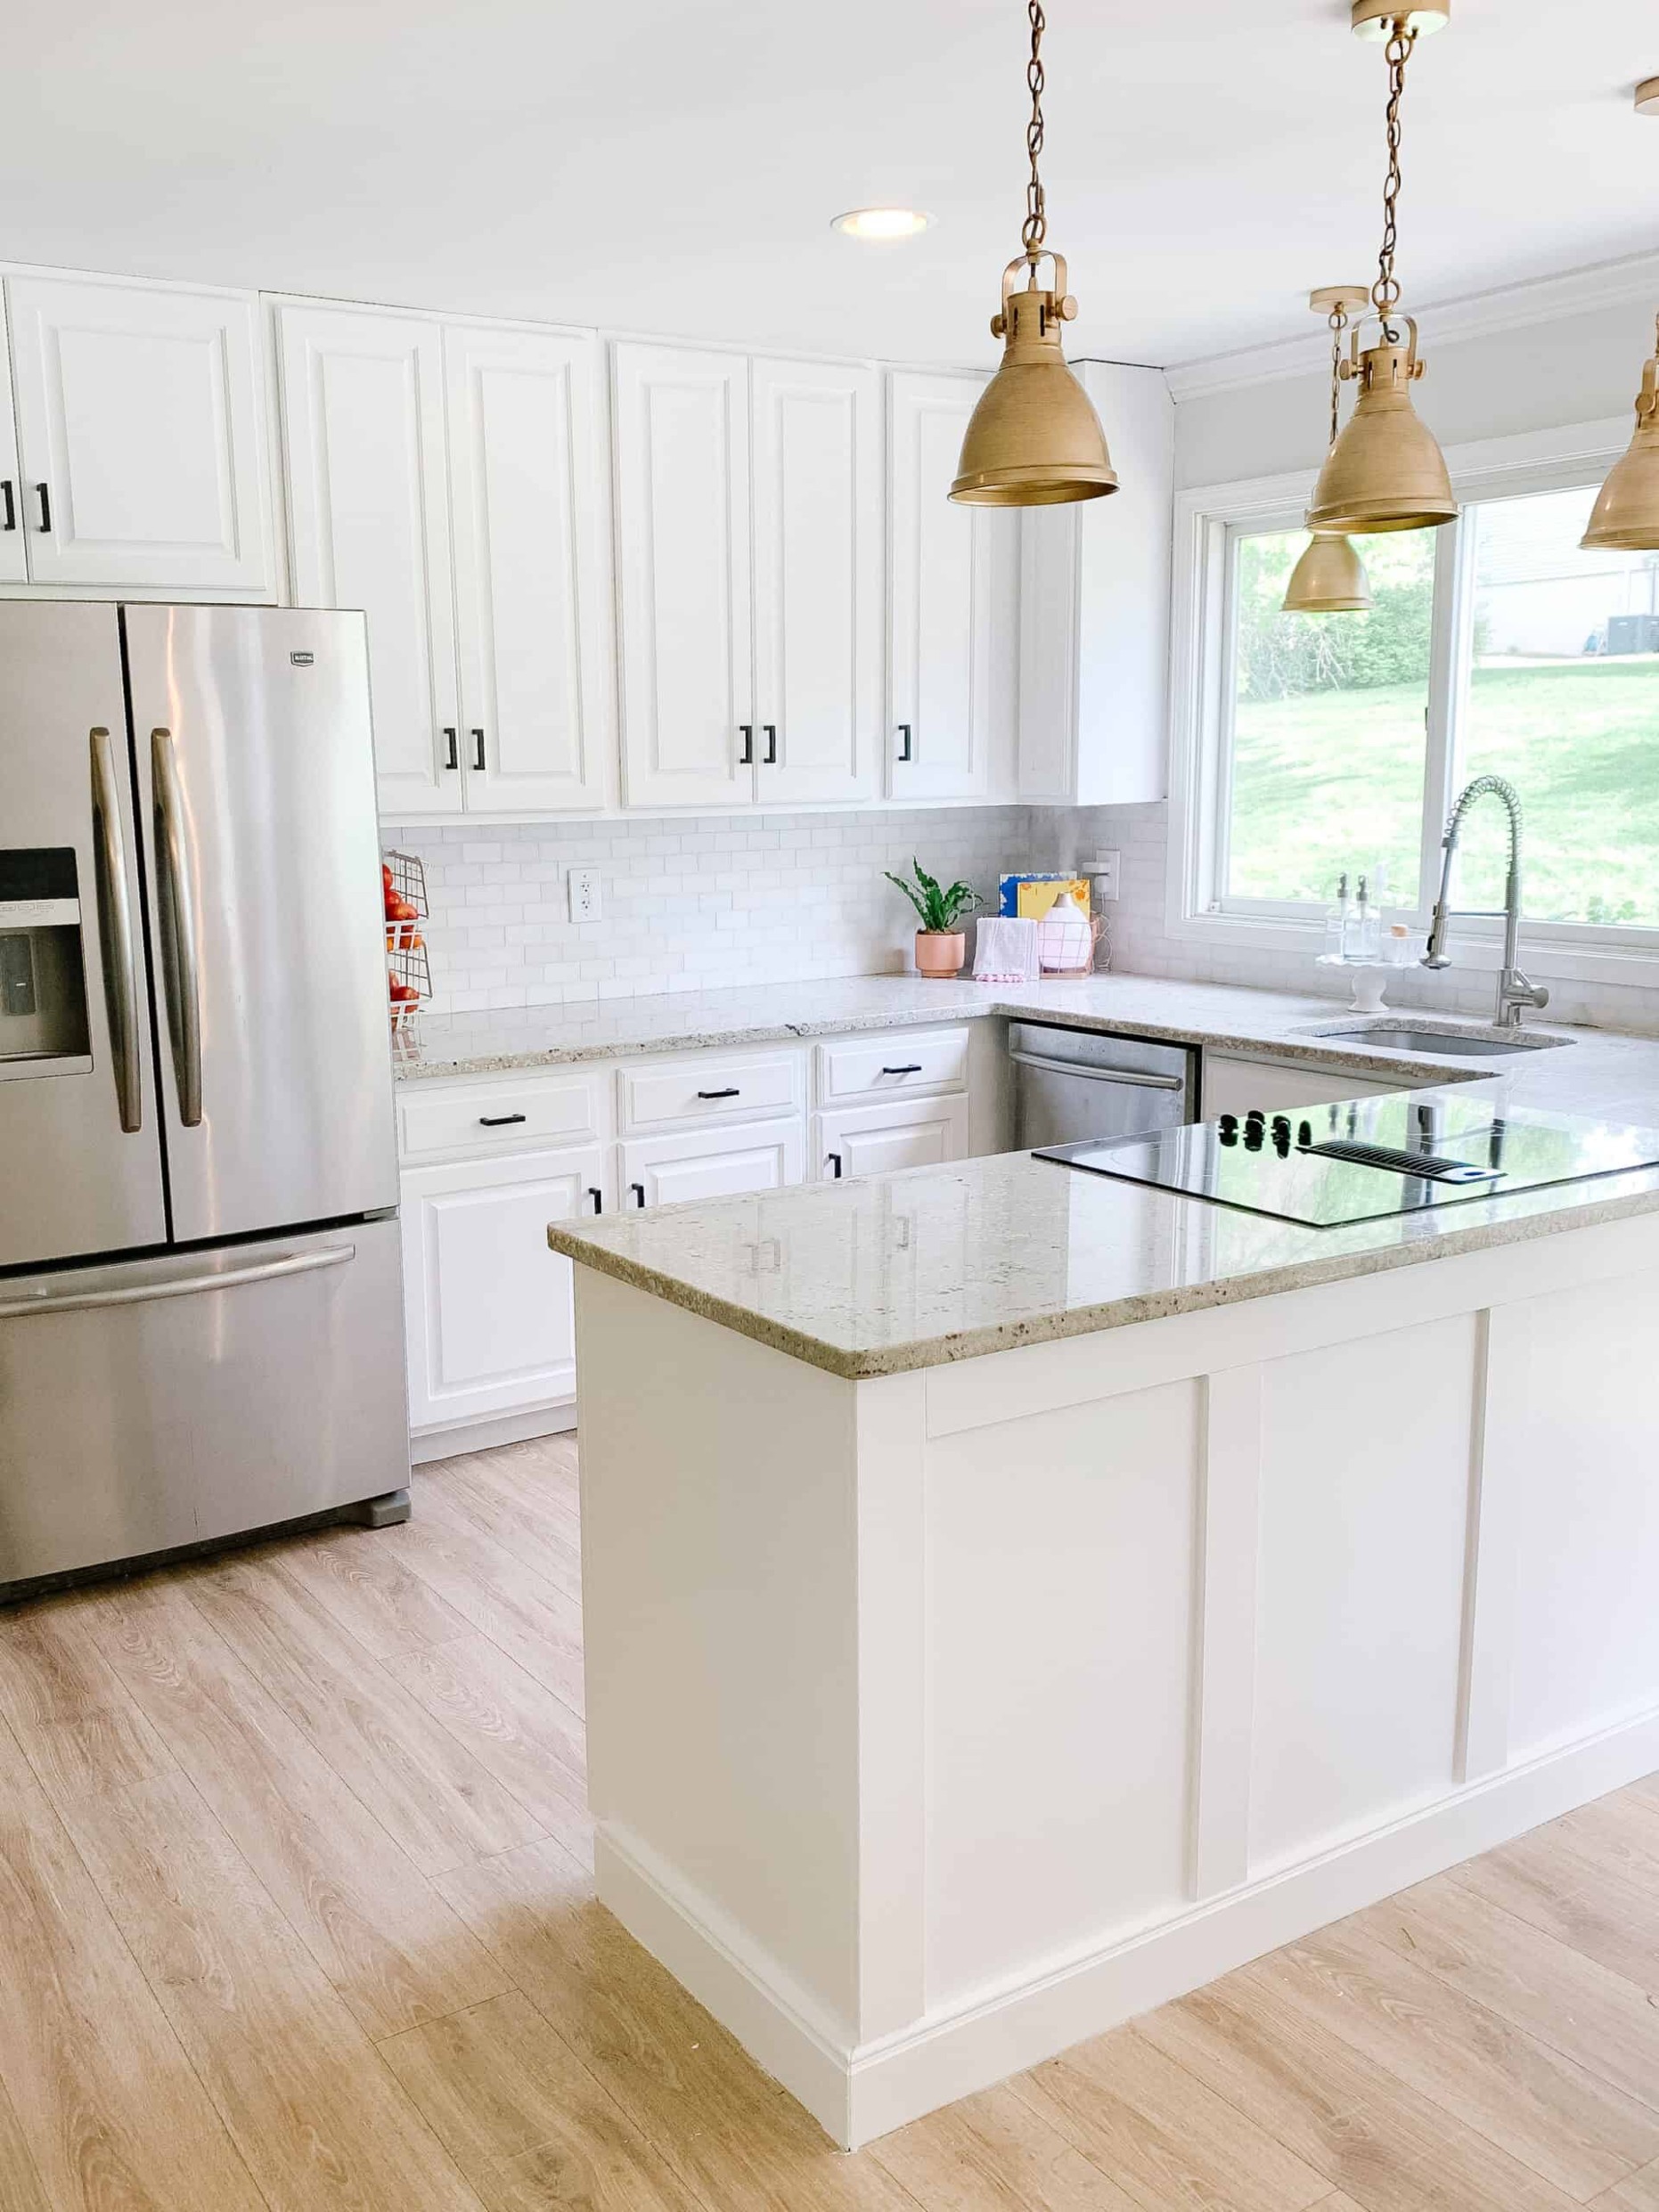 Painting Kitchen Cabinets White - Kitchen Reveal - arinsolangeathome - white paint cabinets